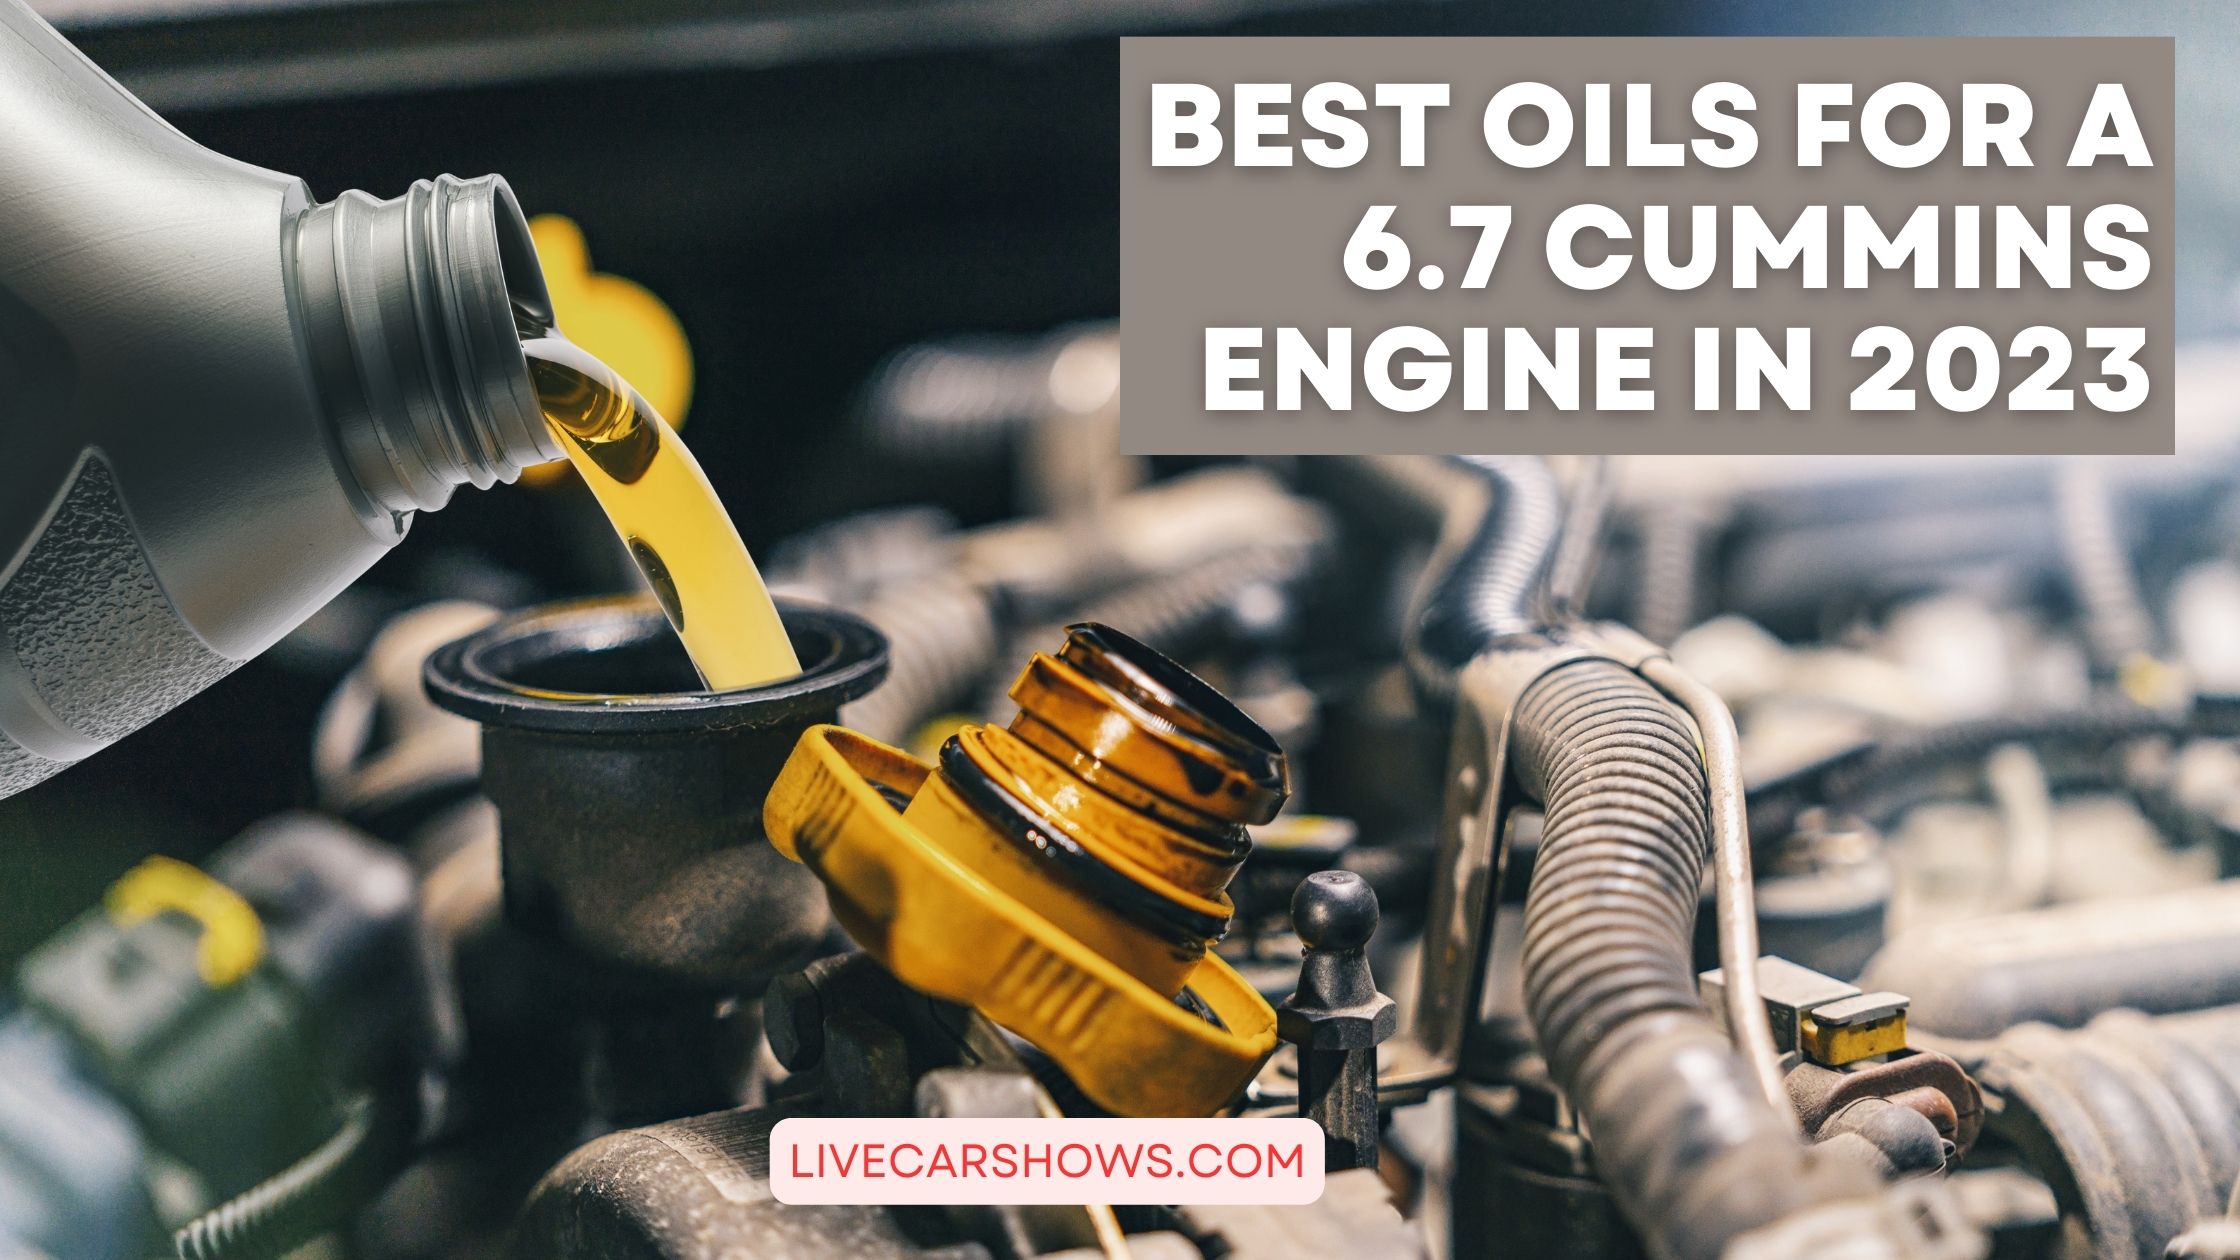 Best Oils for a 6.7 Cummins Engine in 2023